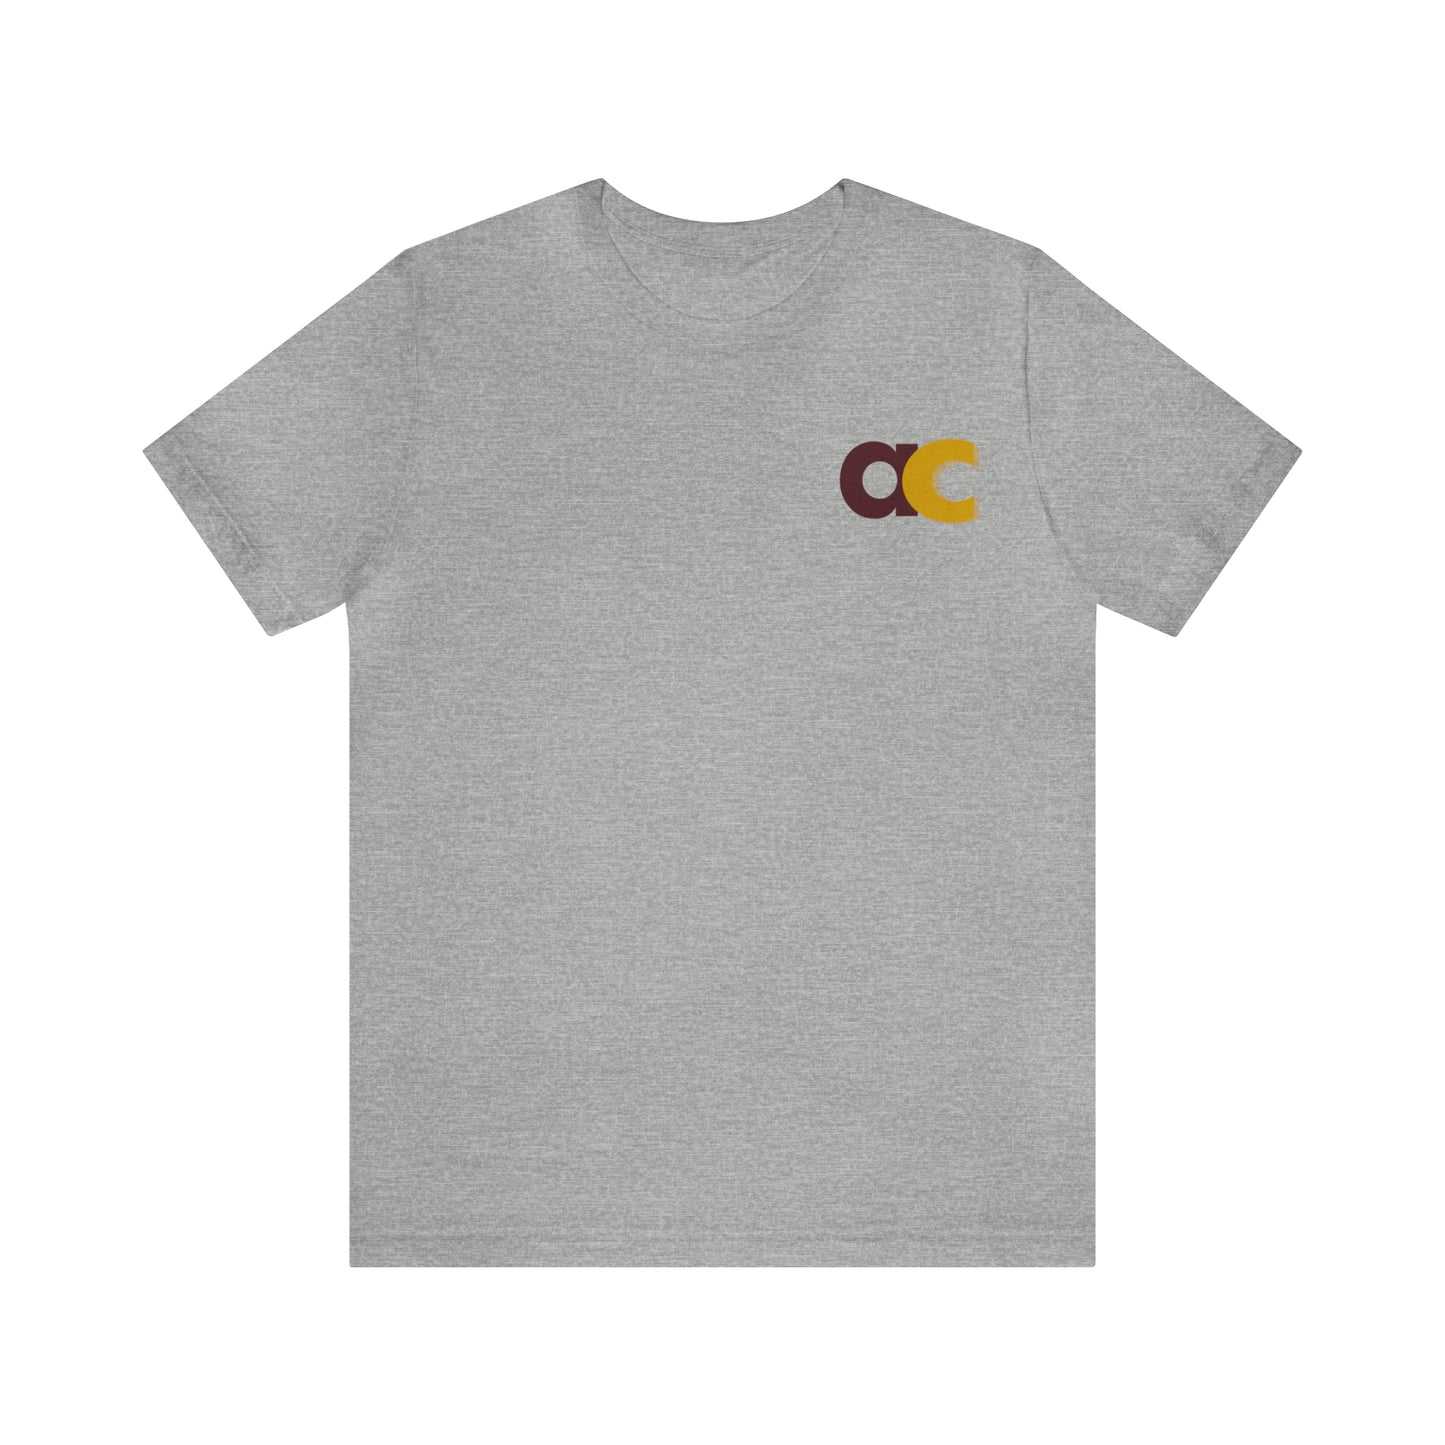 Alex Caouette: Gameday Tee